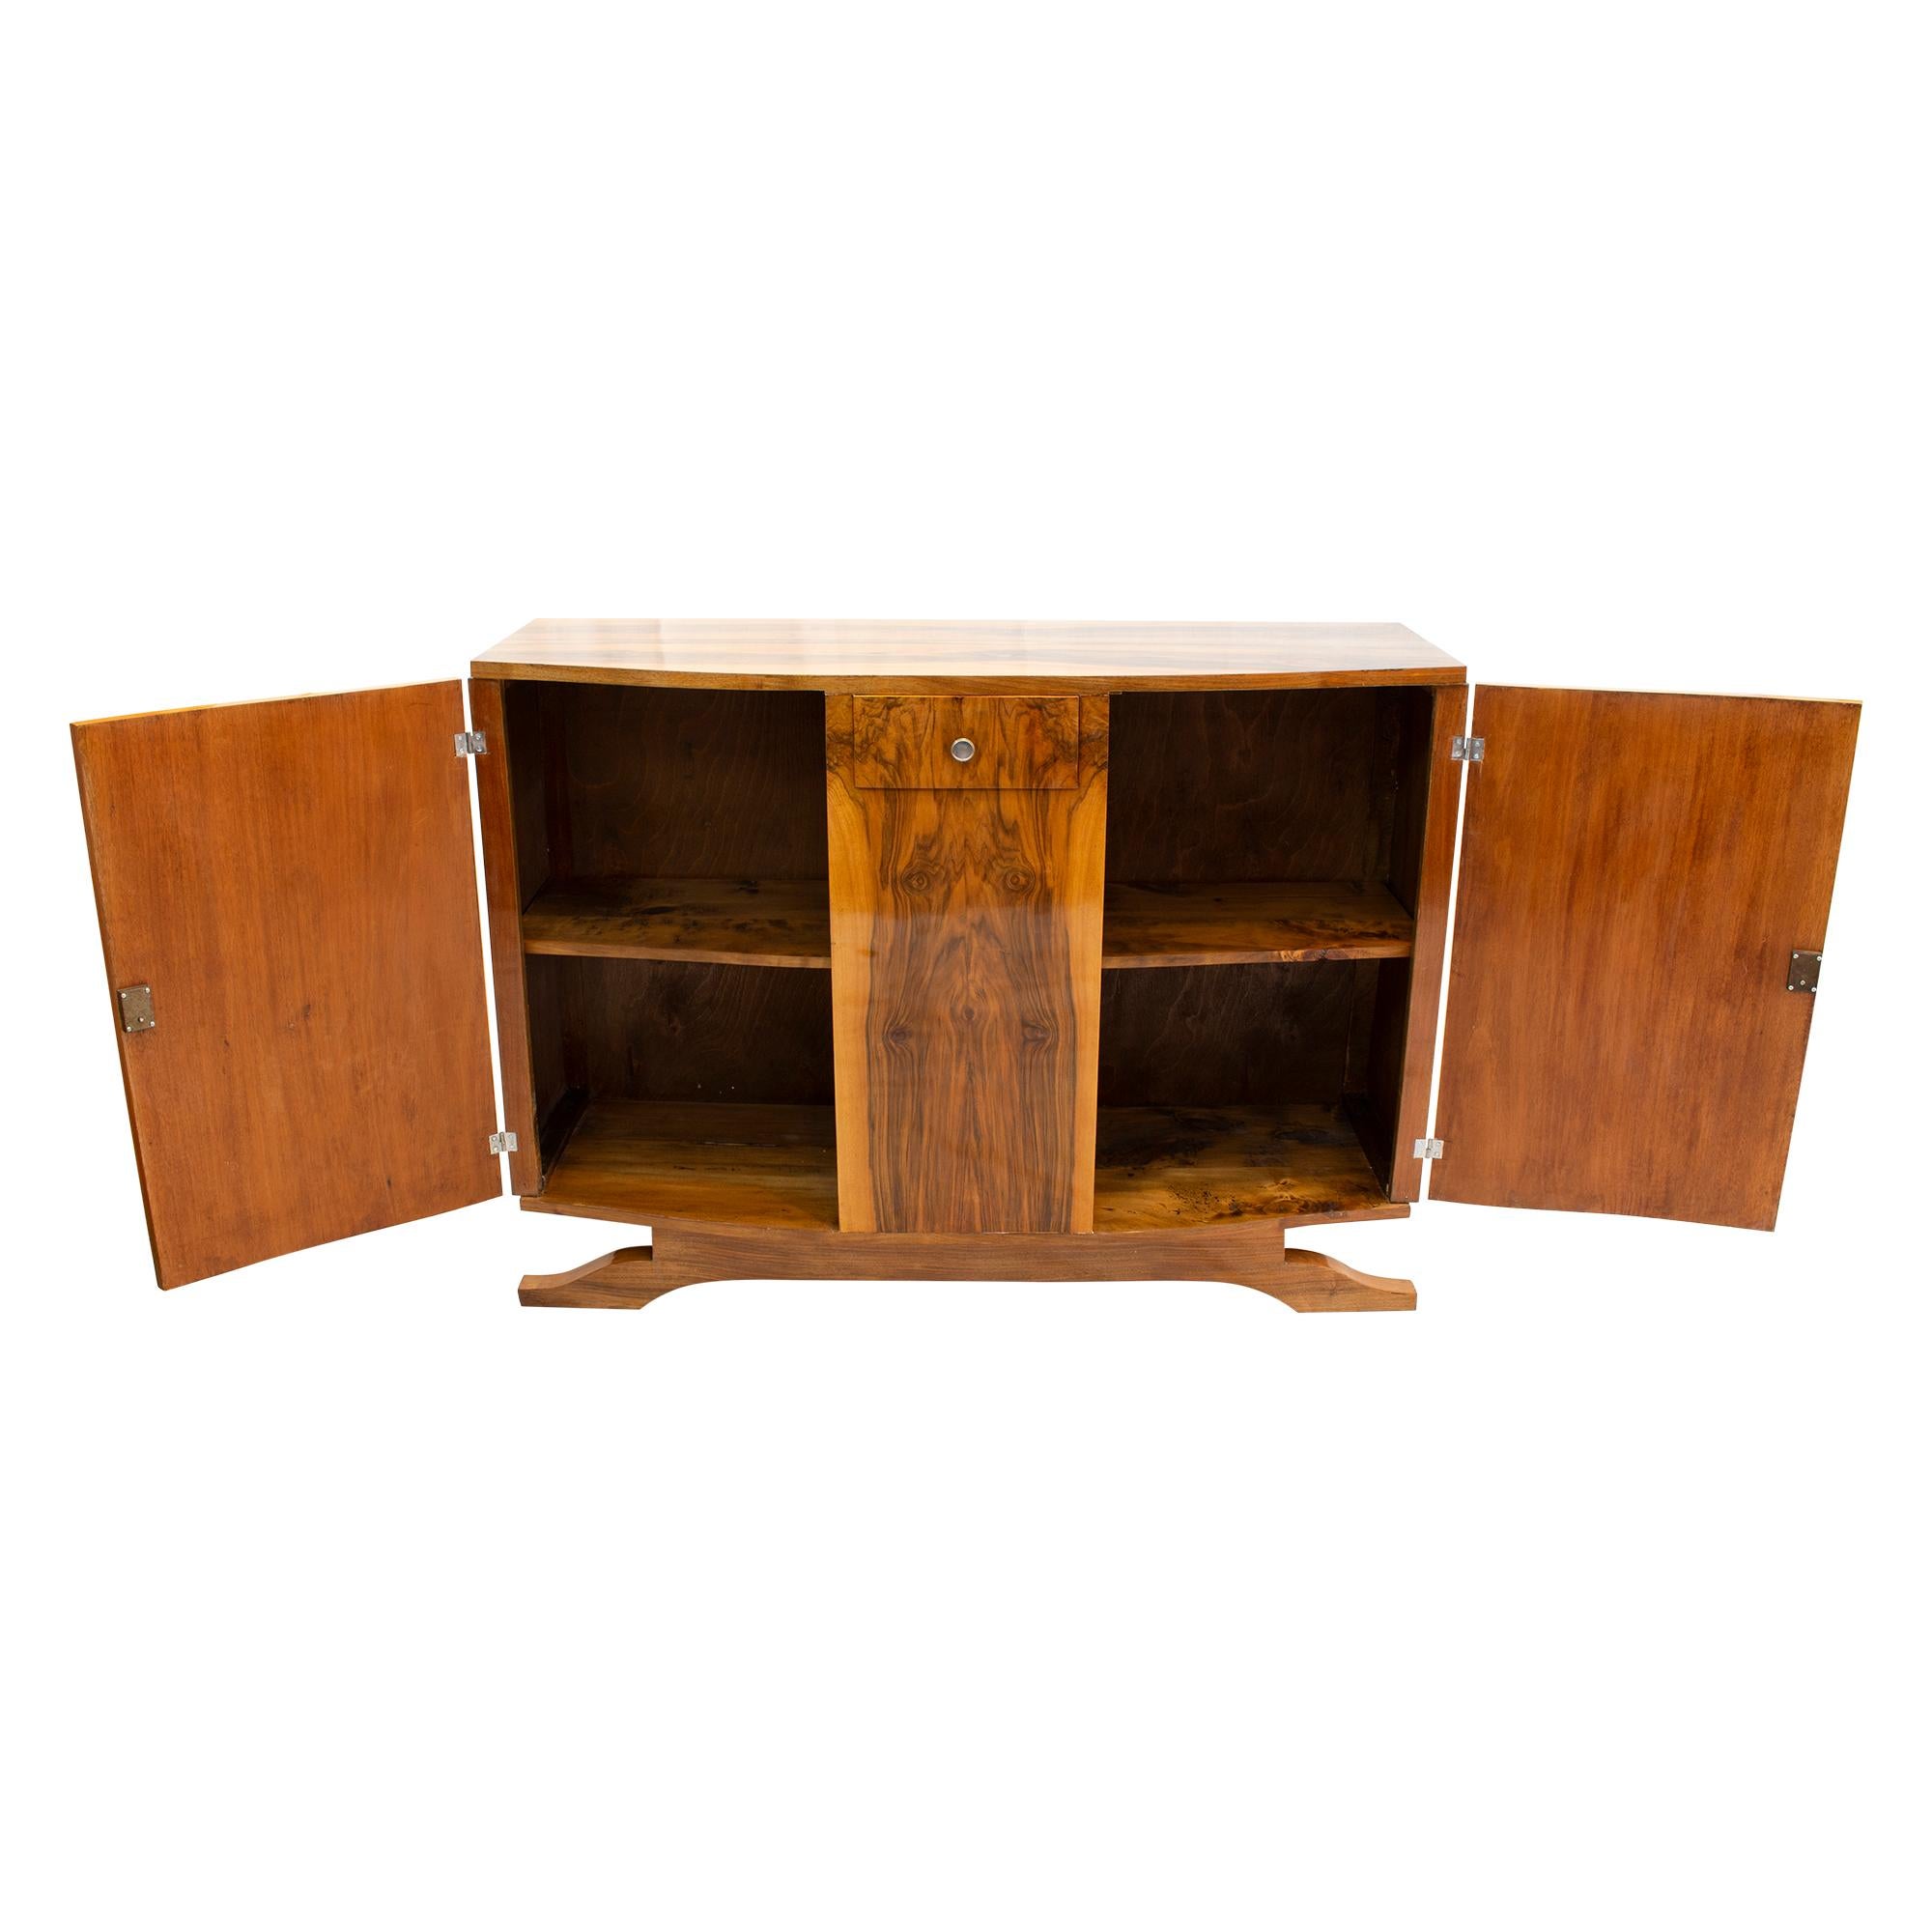 Beautiful sideboard. The sideboard was made of walnut veneer on softwood carcass. It comes from France from the Art Deco period around 1930. The fittings and the locks are original. The sideboard was hand polished. The veneer pattern is continuous,